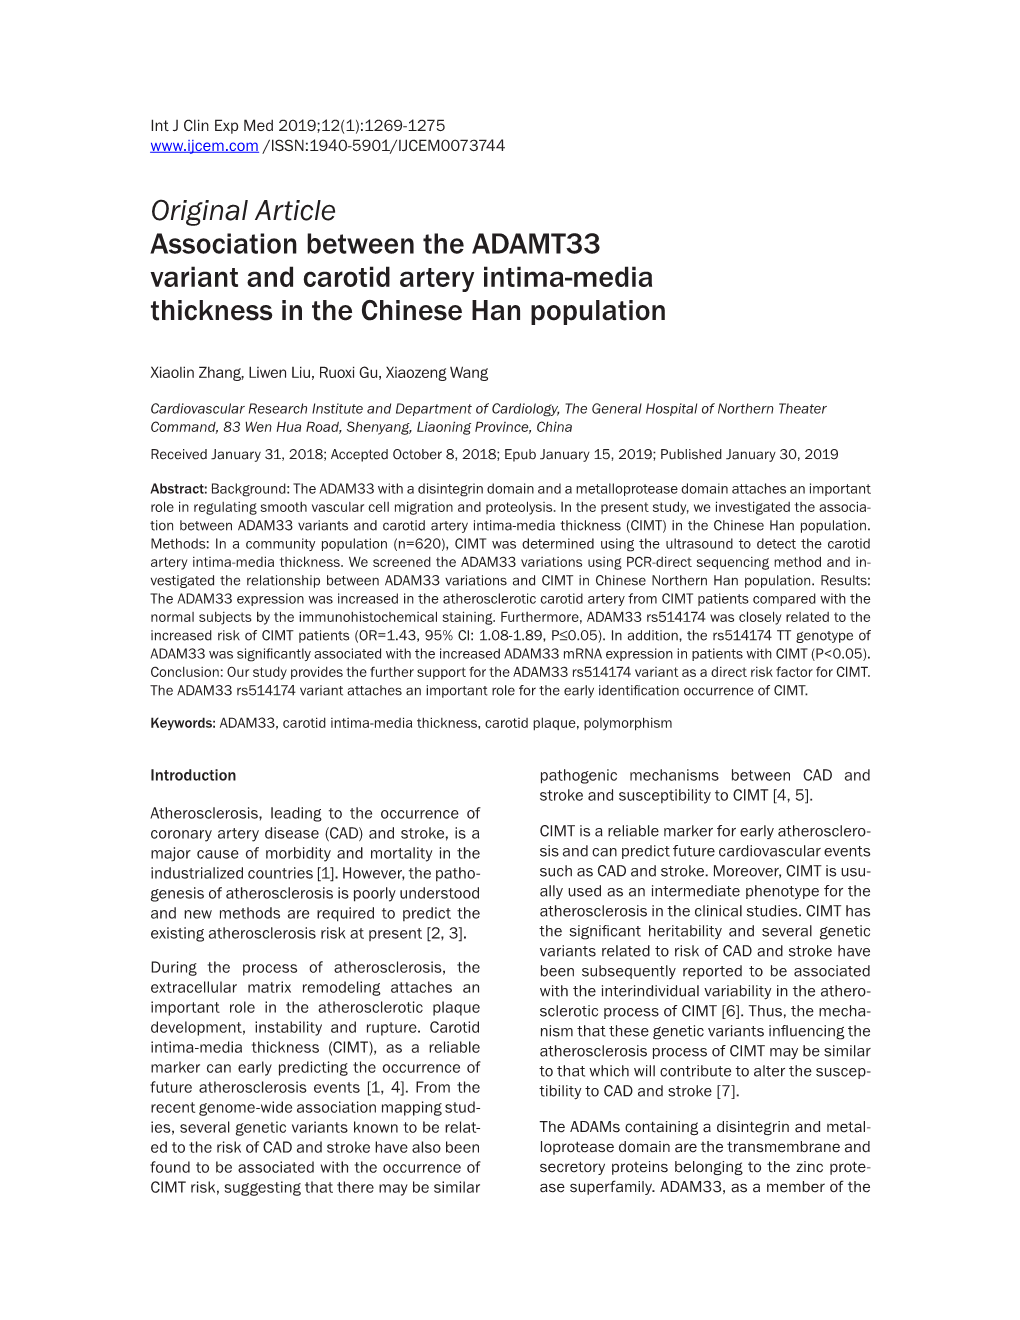 Original Article Association Between the ADAMT33 Variant and Carotid Artery Intima-Media Thickness in the Chinese Han Population